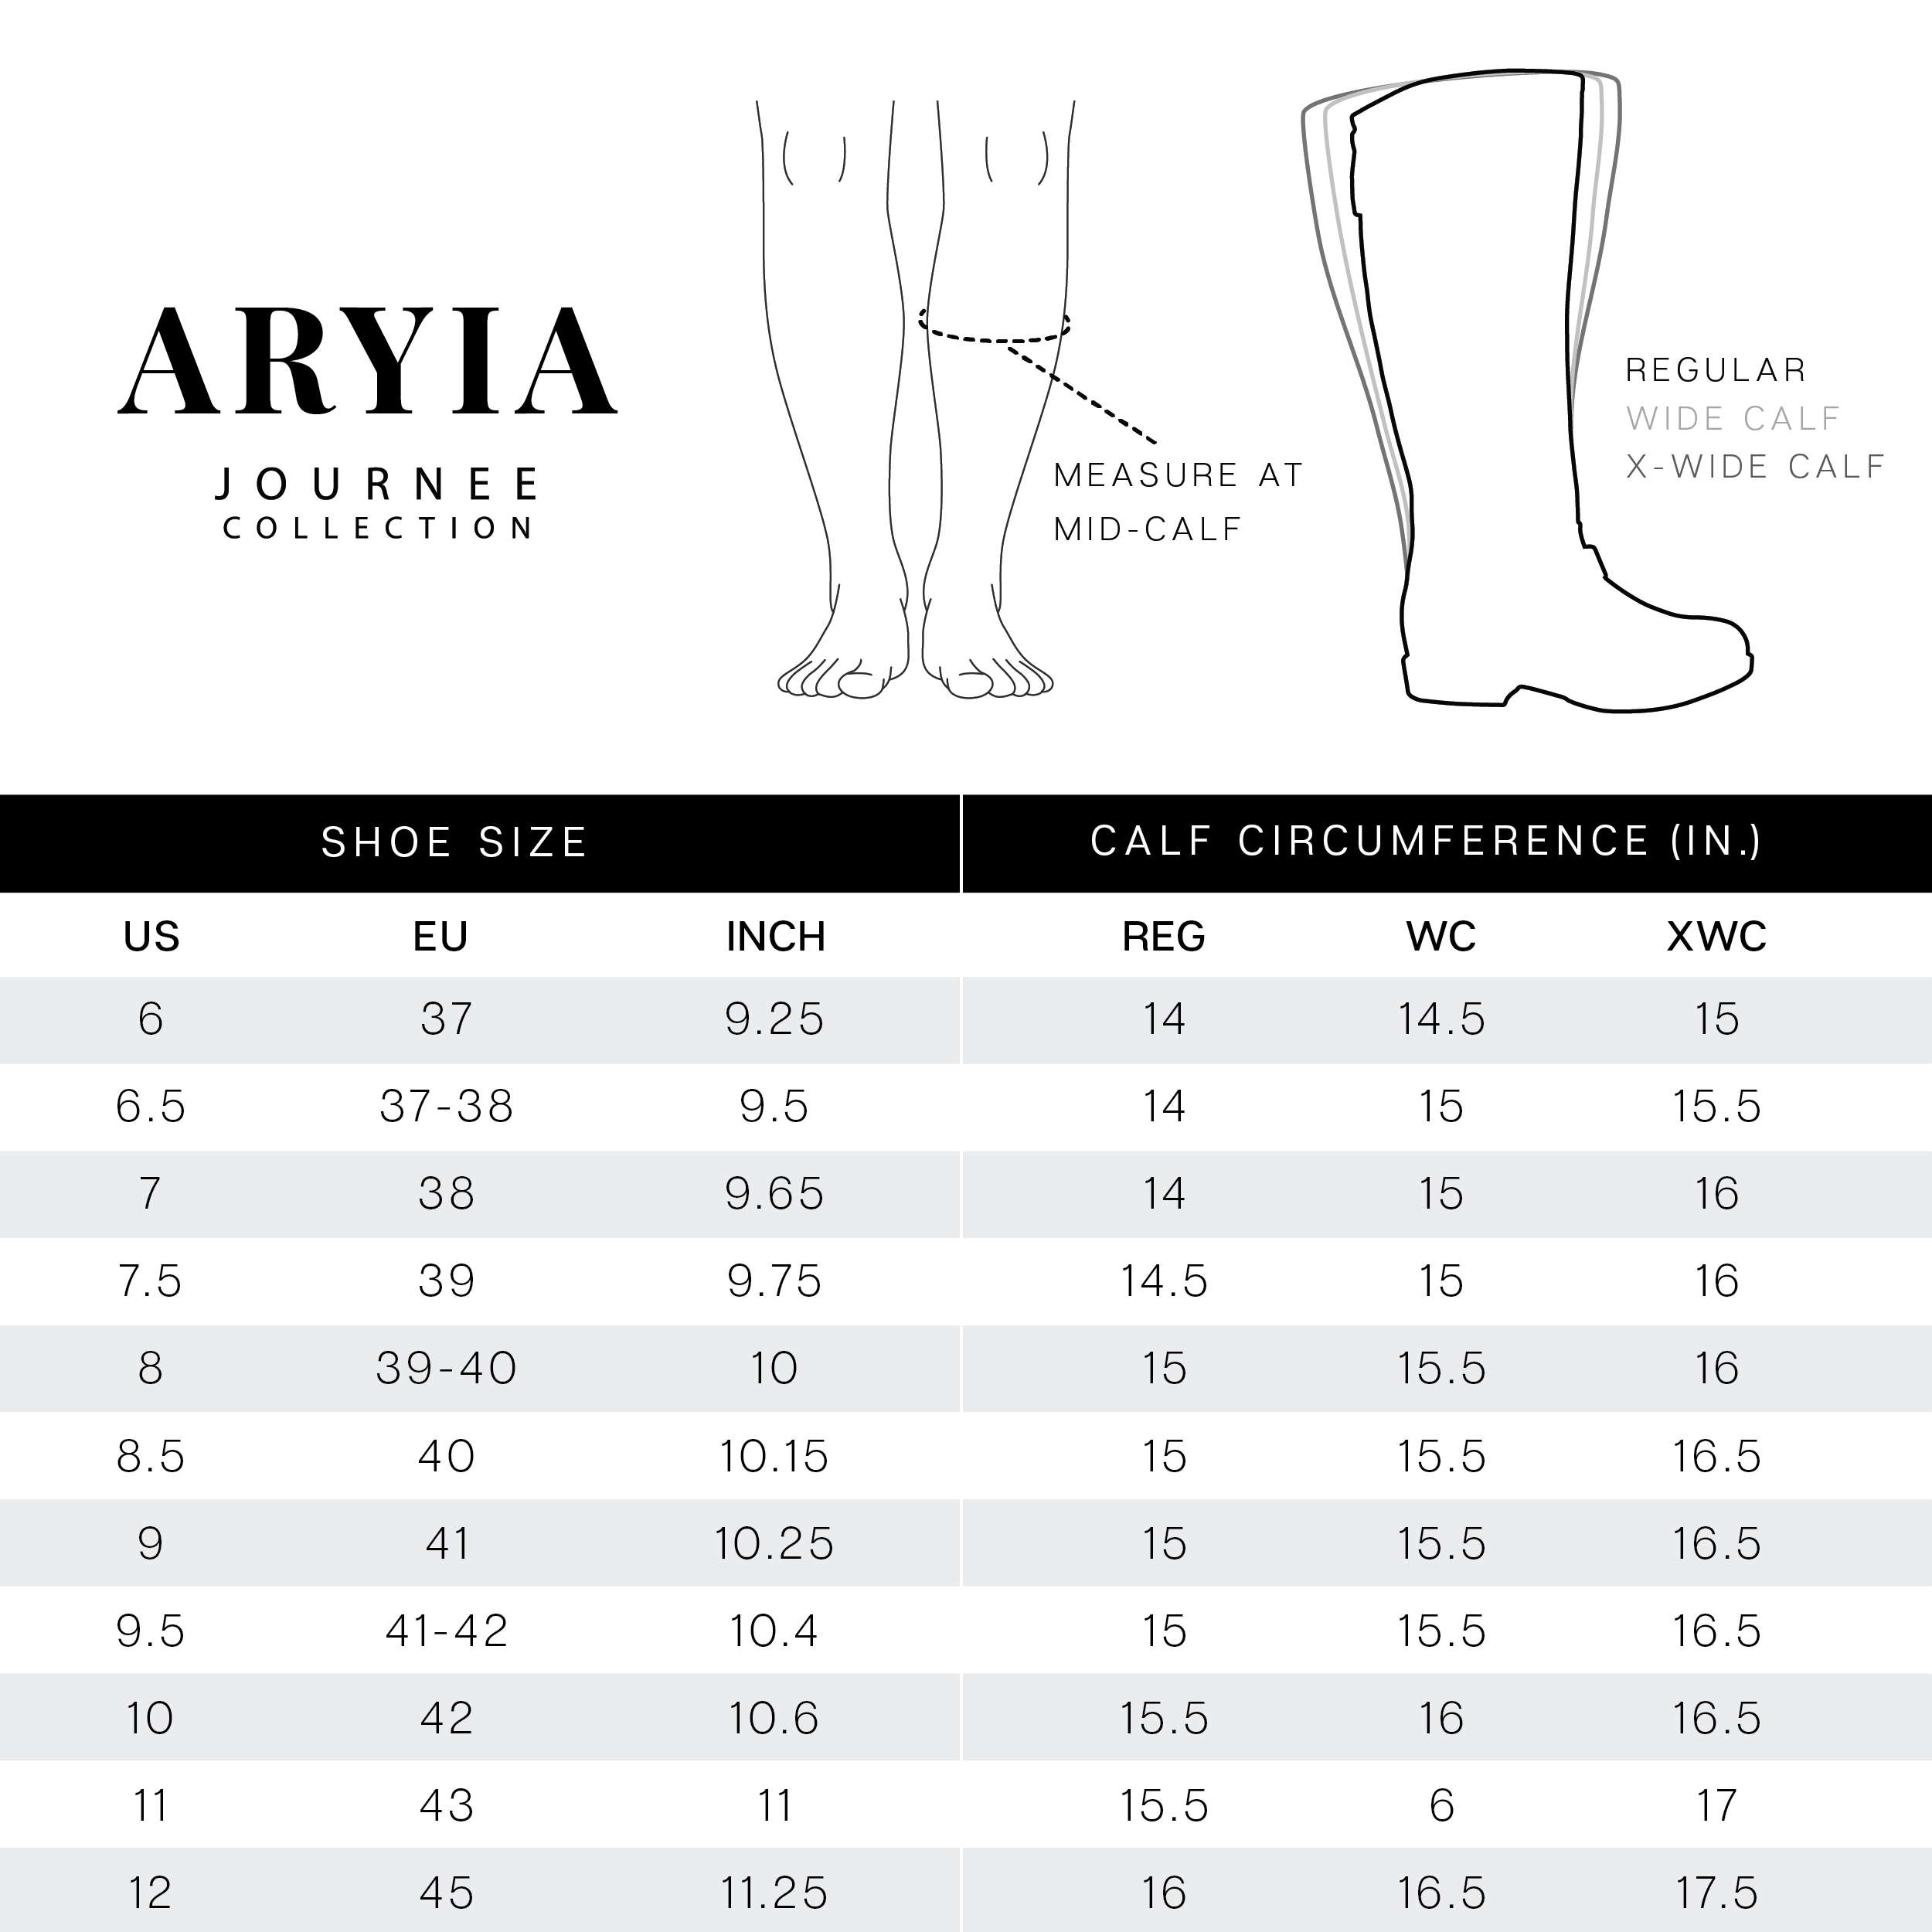 ARYIA EXTRA WIDE CALF - Journee Collection